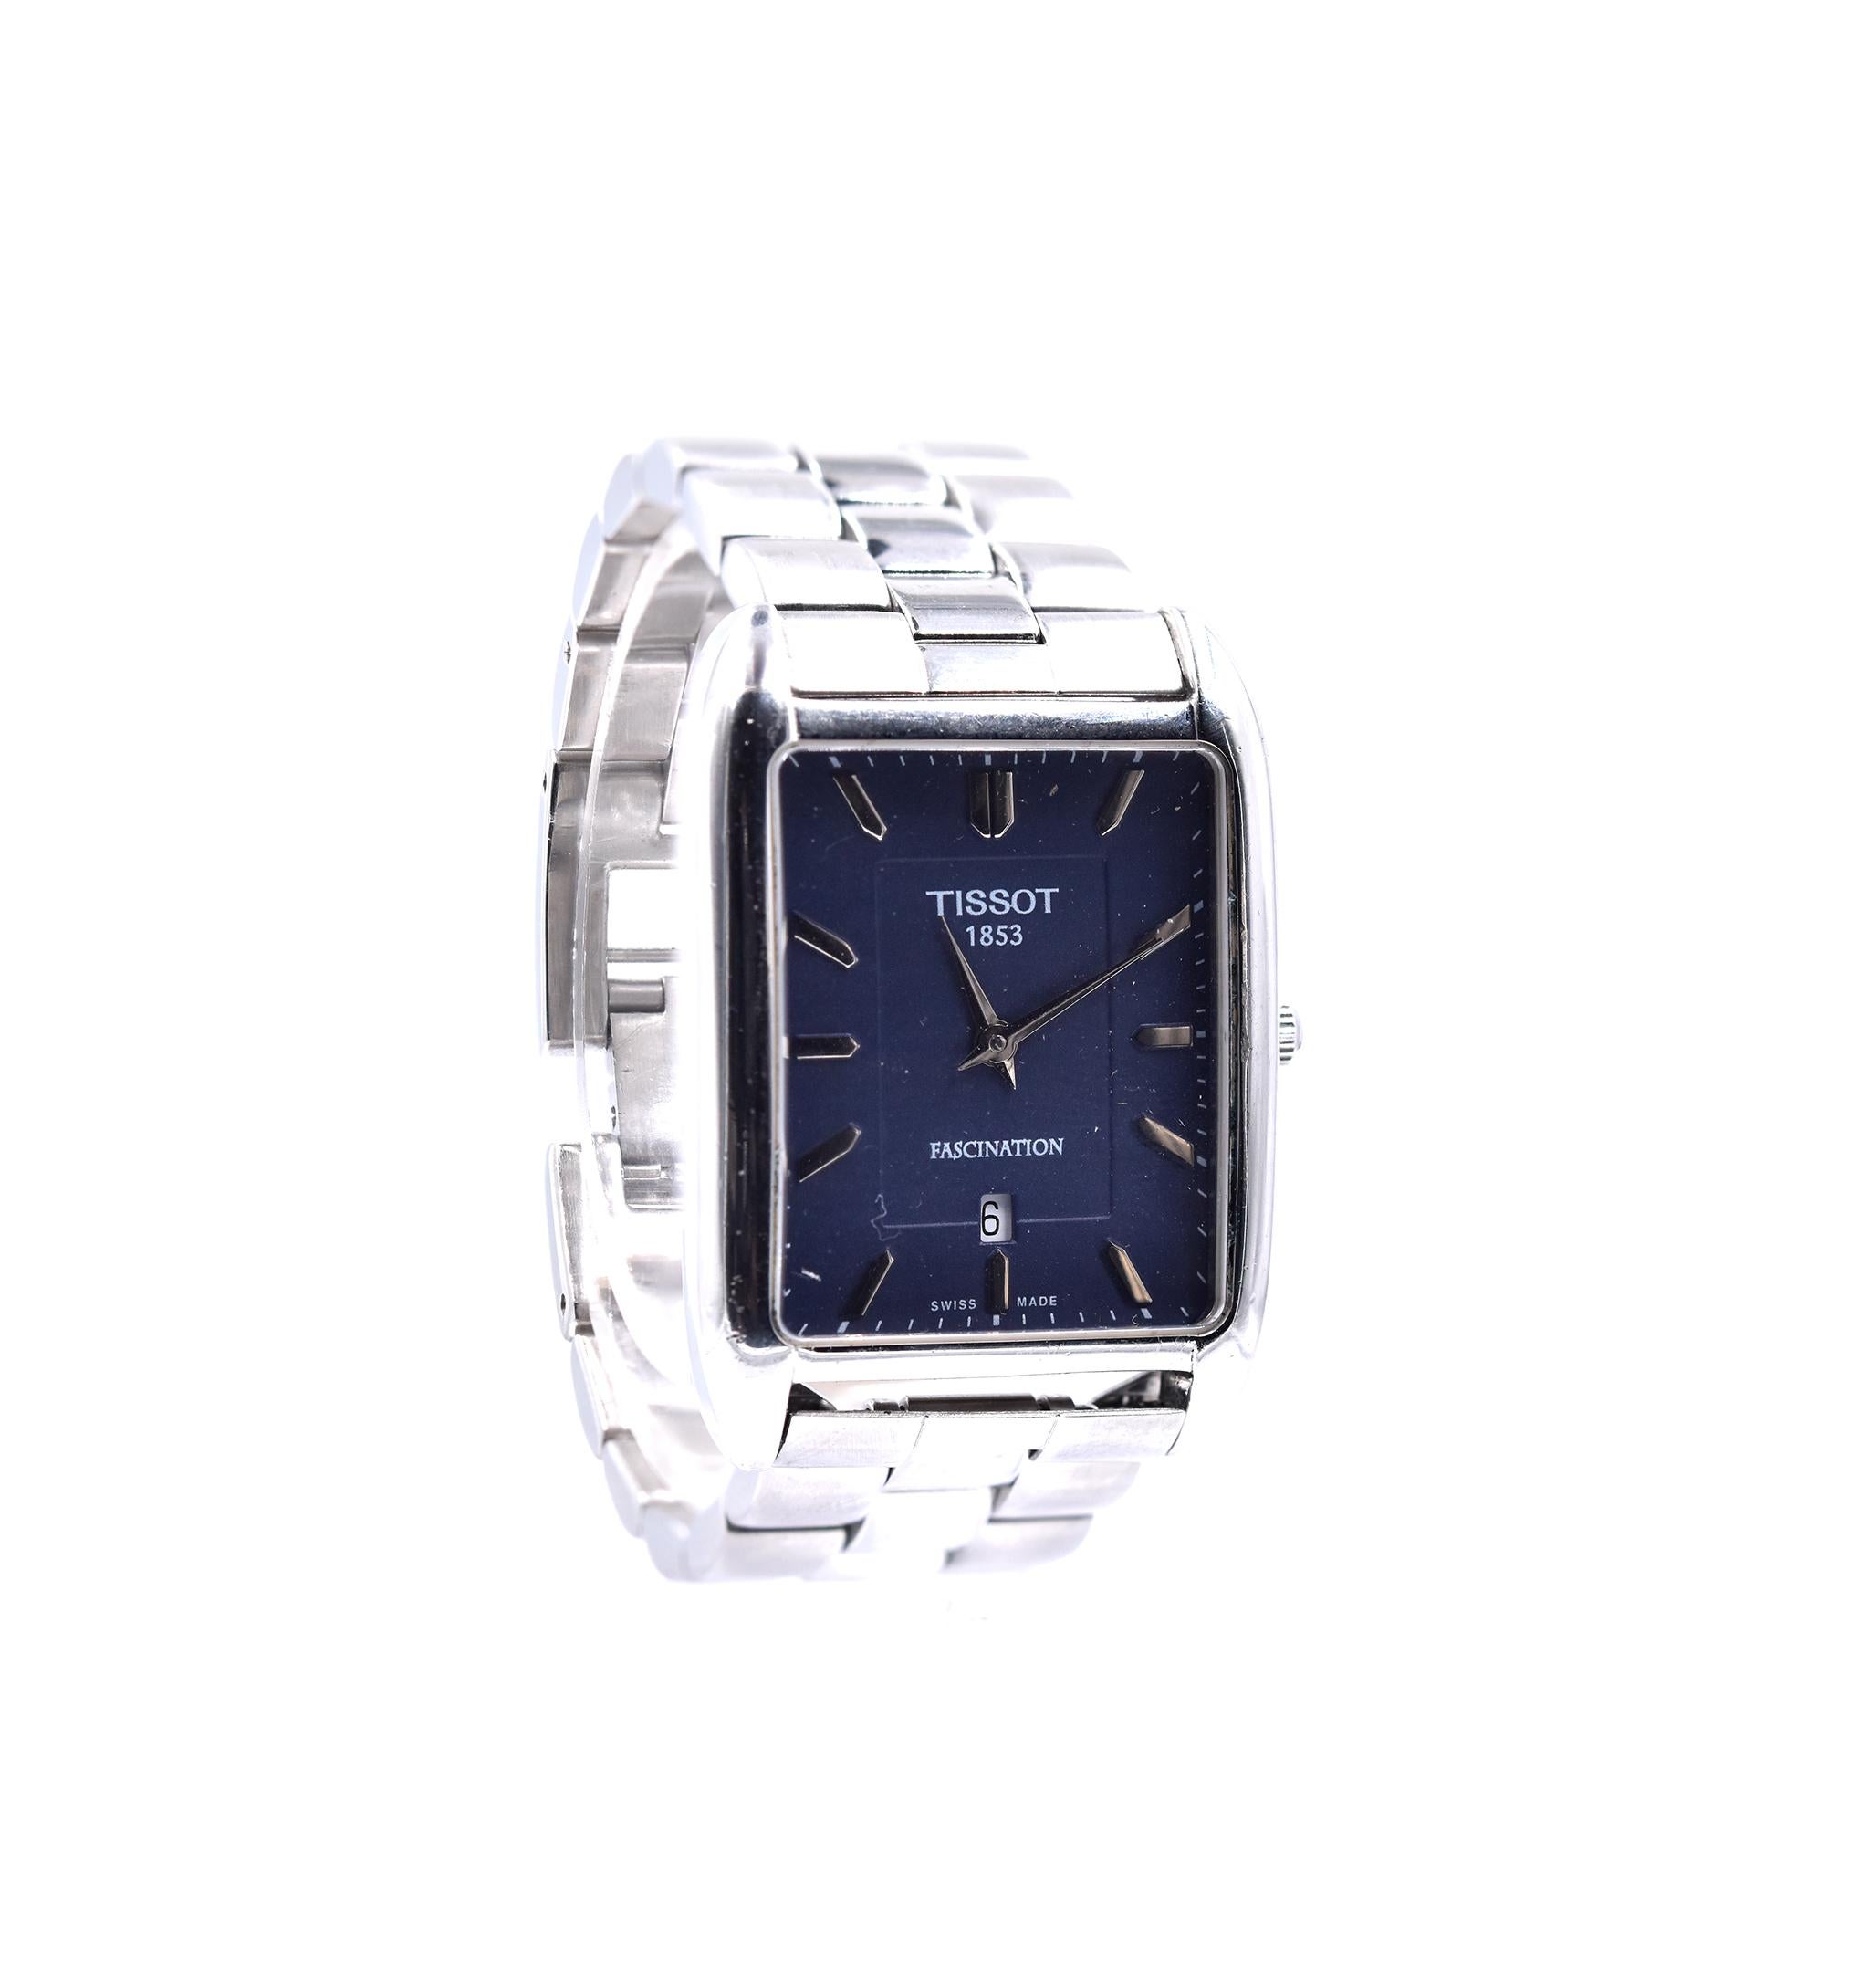 Movement: quartz
Function: hours, minuets, date
Case: 36mm rectangular stainless steel case, sapphire crystal
Bracelet: stainless steel 
Dial: navy stick dial
Reference #: Fascination
Serial # TXXX

No box and papers
Guaranteed to be authentic by